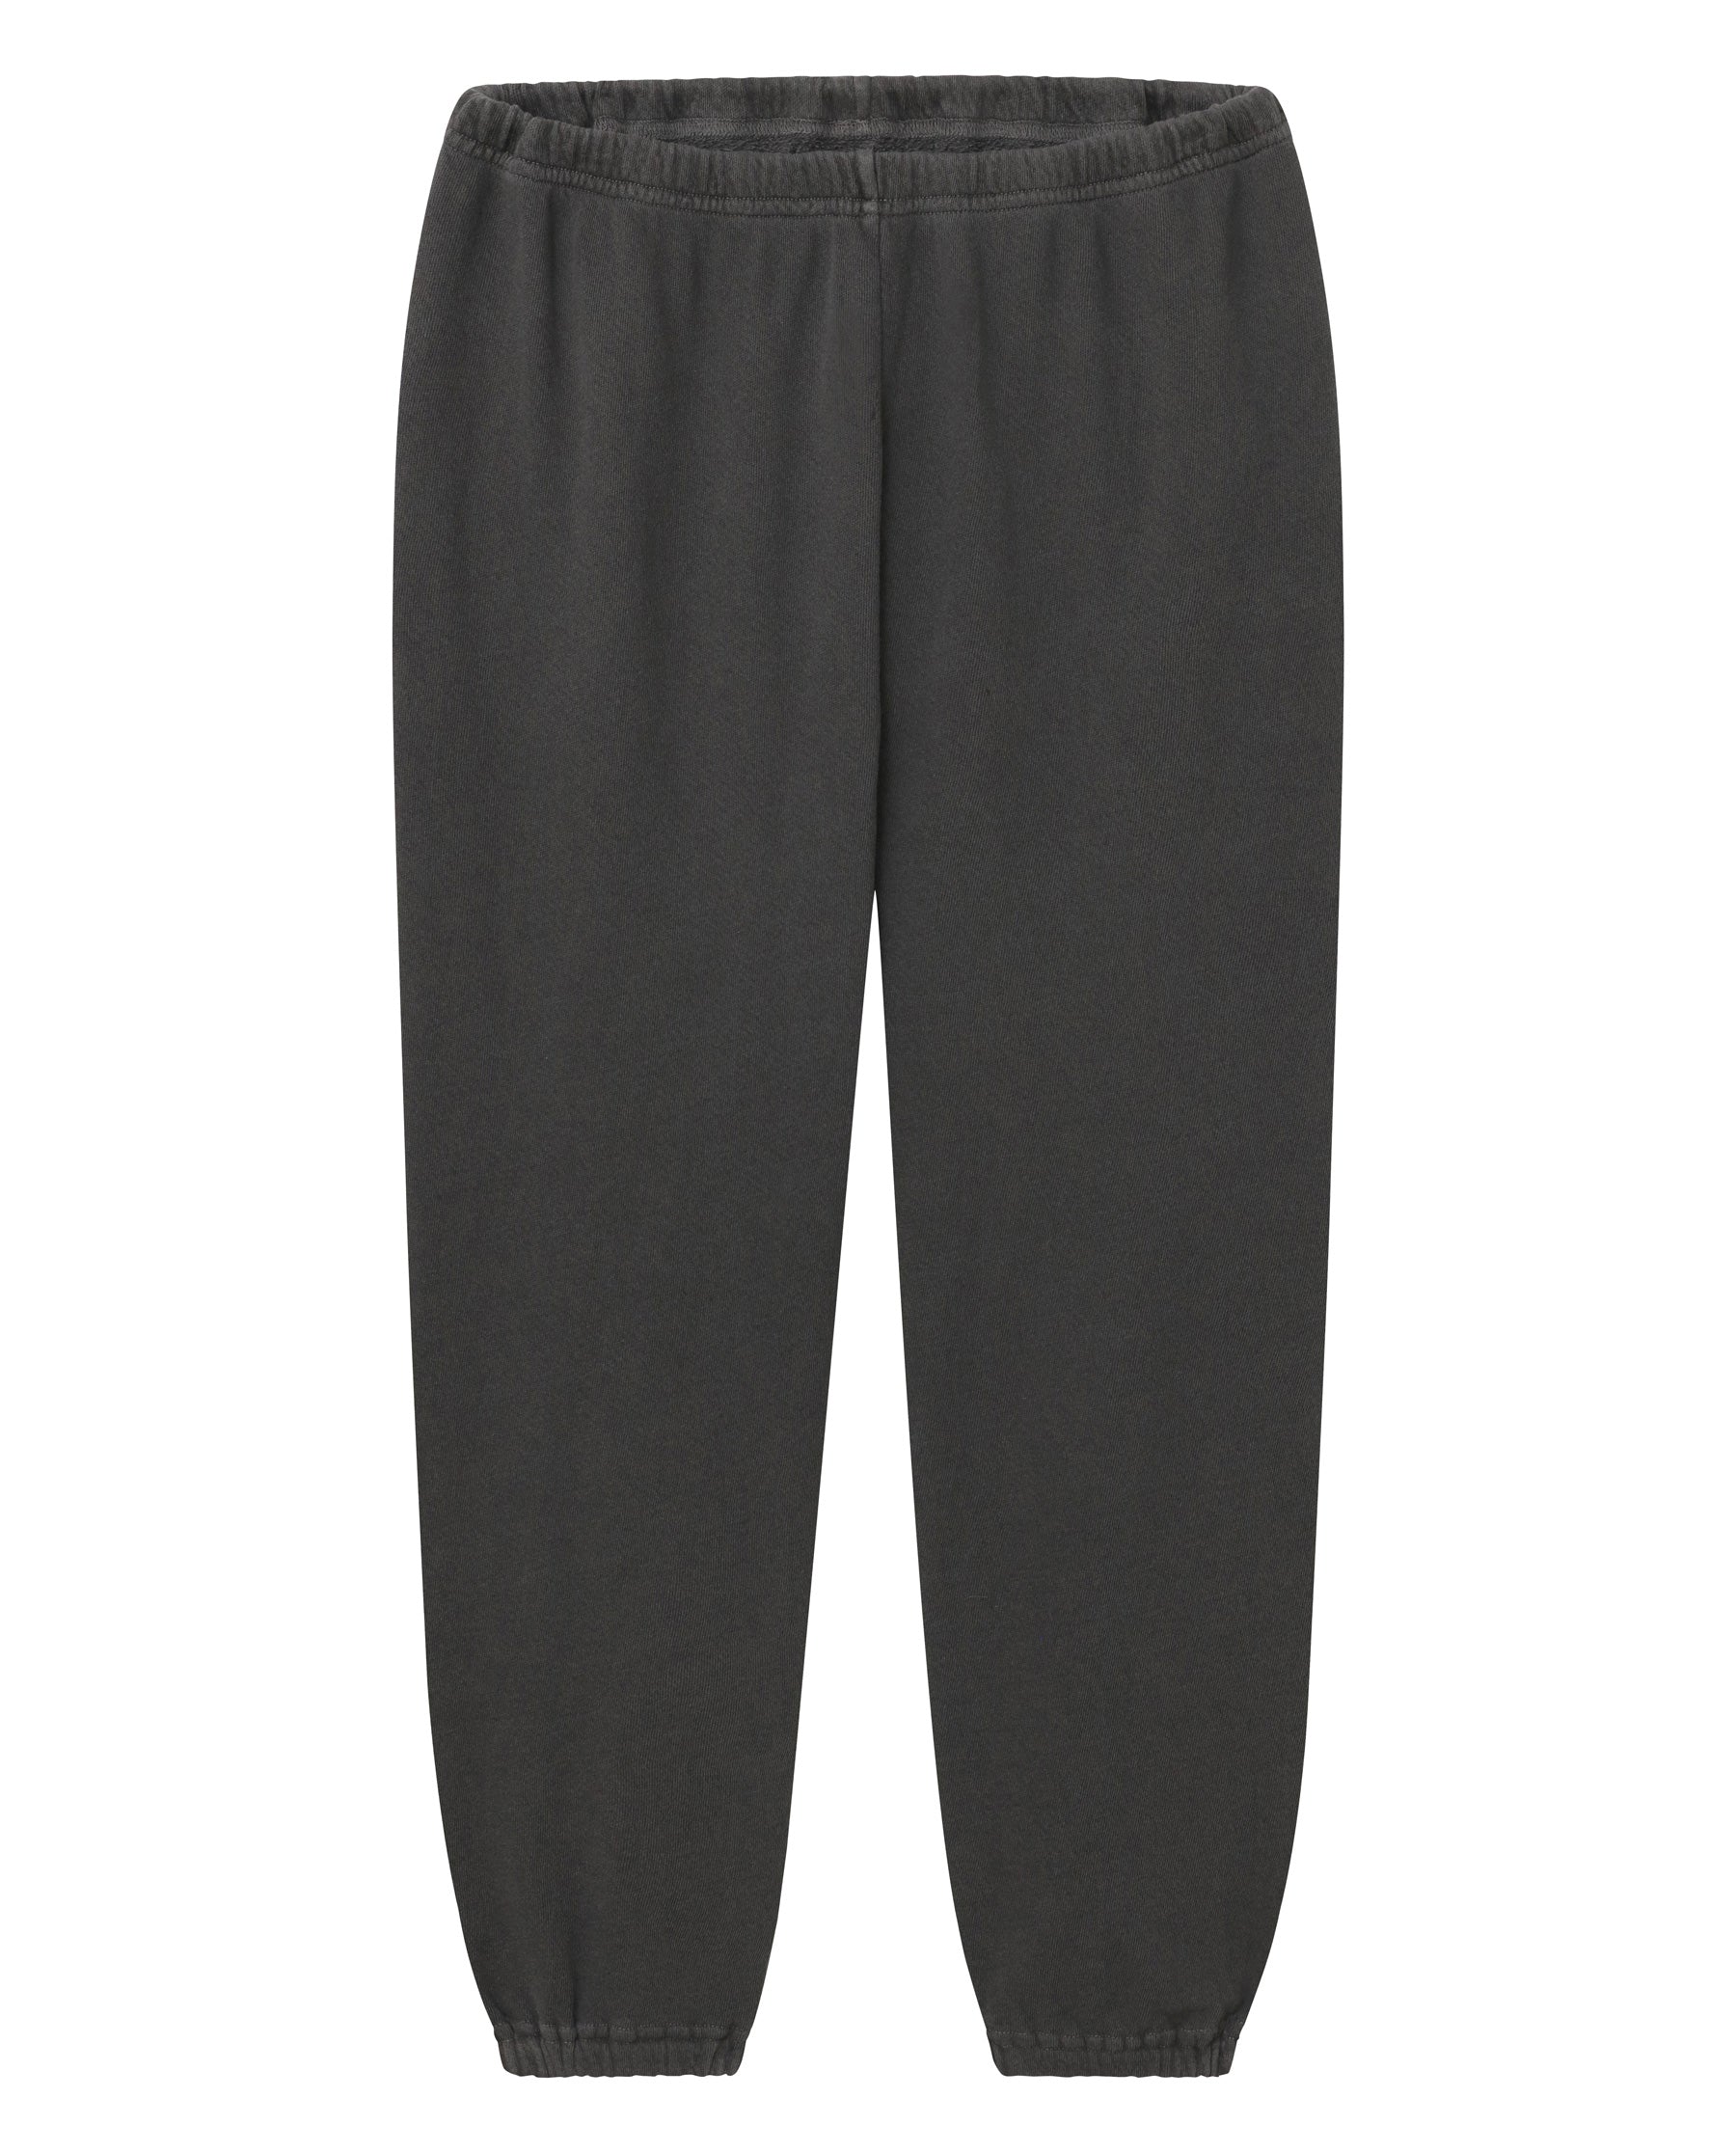 The Stadium Sweatpant. Solid -- WASHED BLACK SWEATPANTS THE GREAT. CORE KNITS